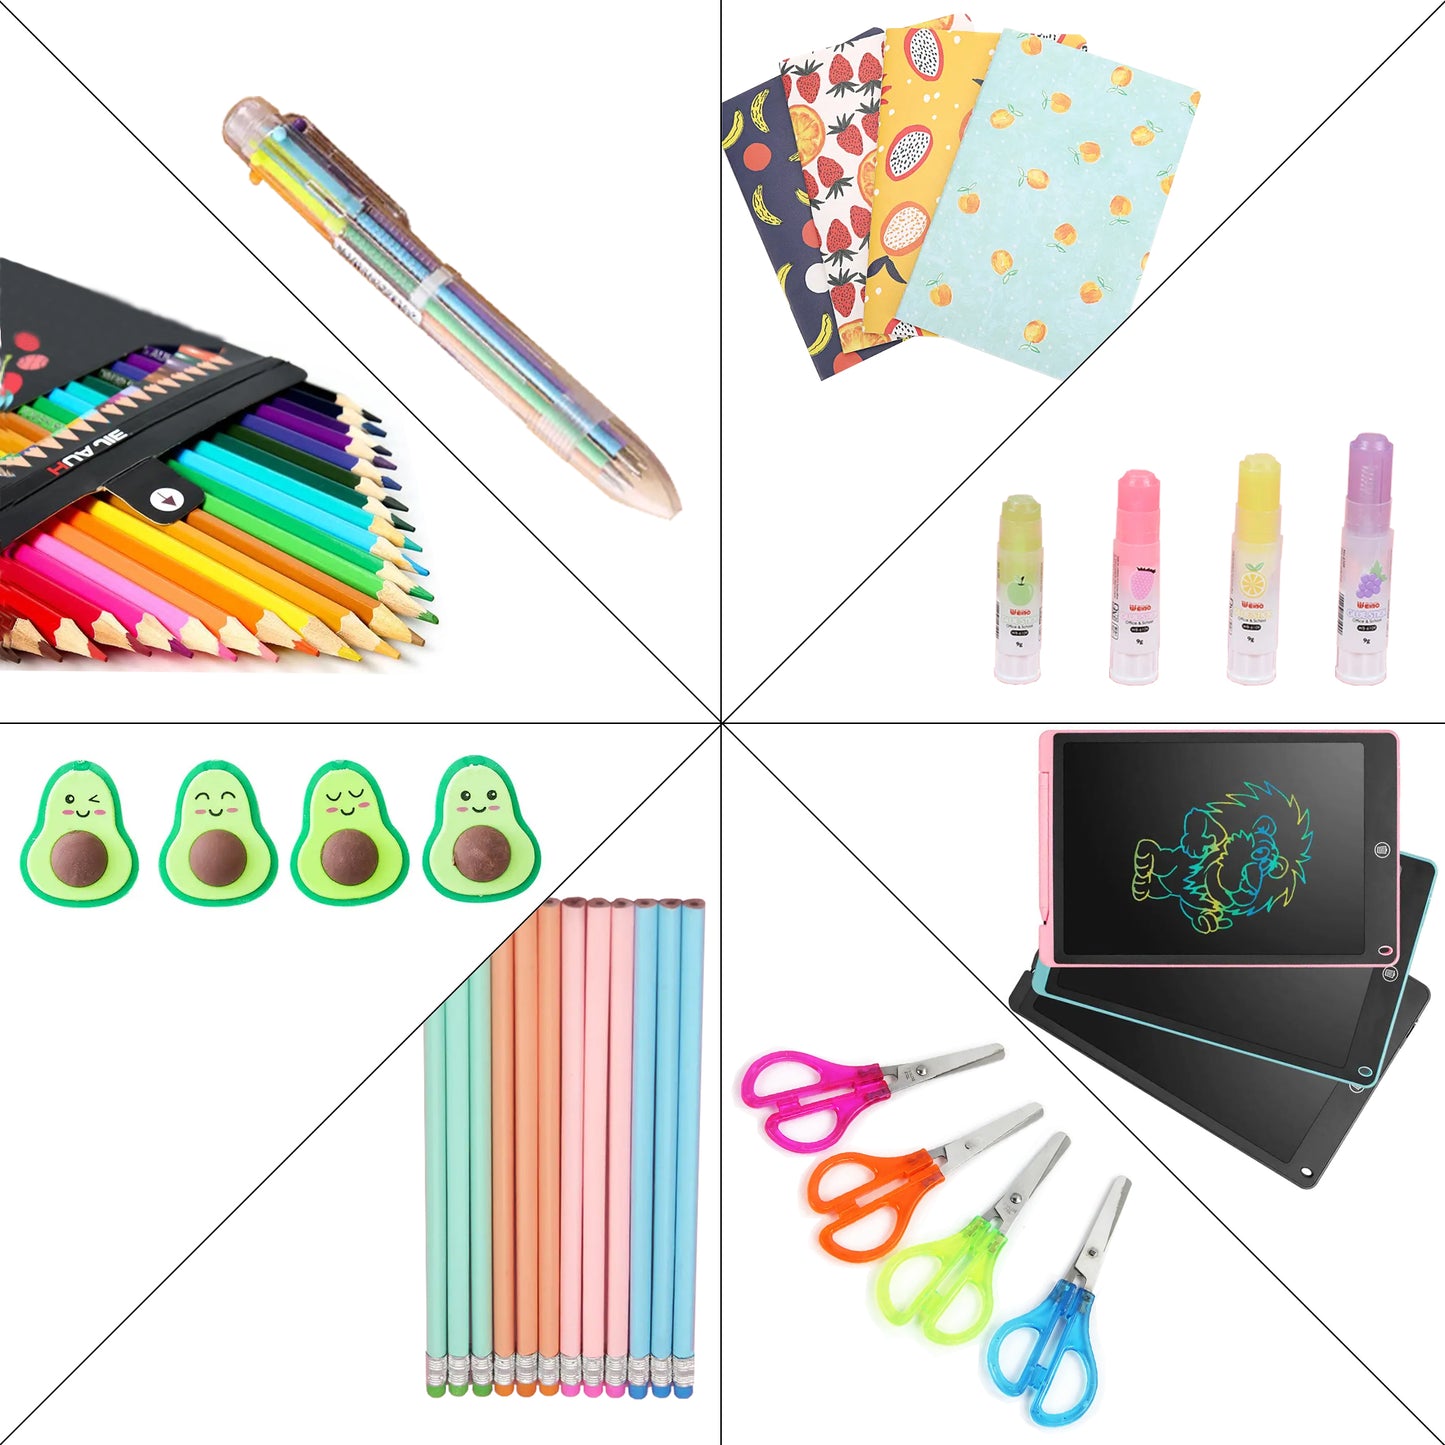 Teach Love Young Elementary School Supply Kit and Caboodle